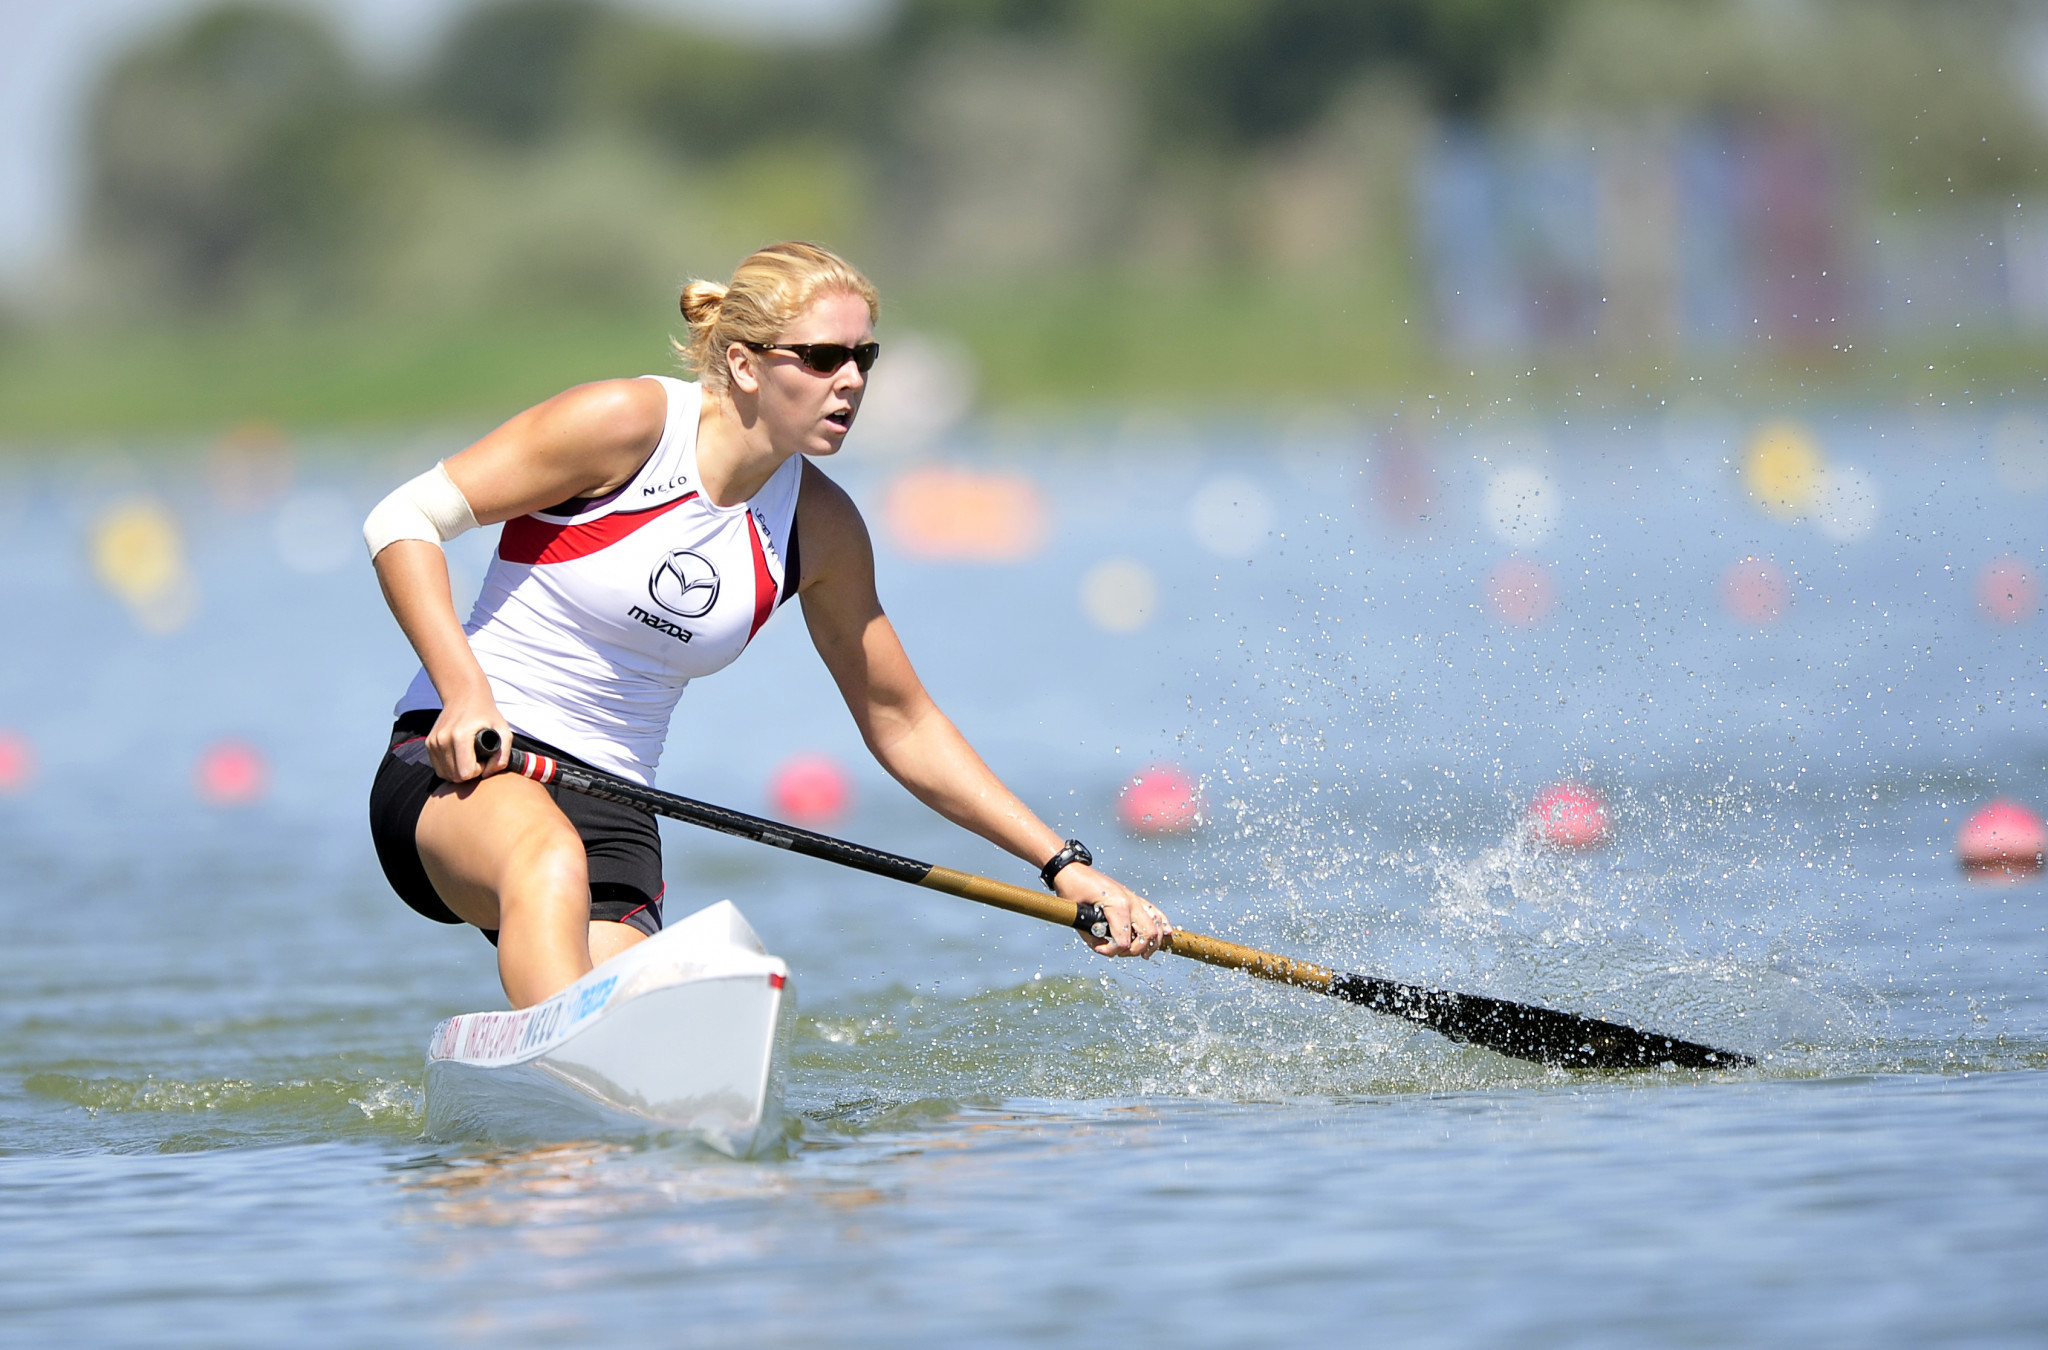 Tokyo 2020 the target as ICF Canoe Sprint World Cup season starts in Poznań for Olympic hopefuls